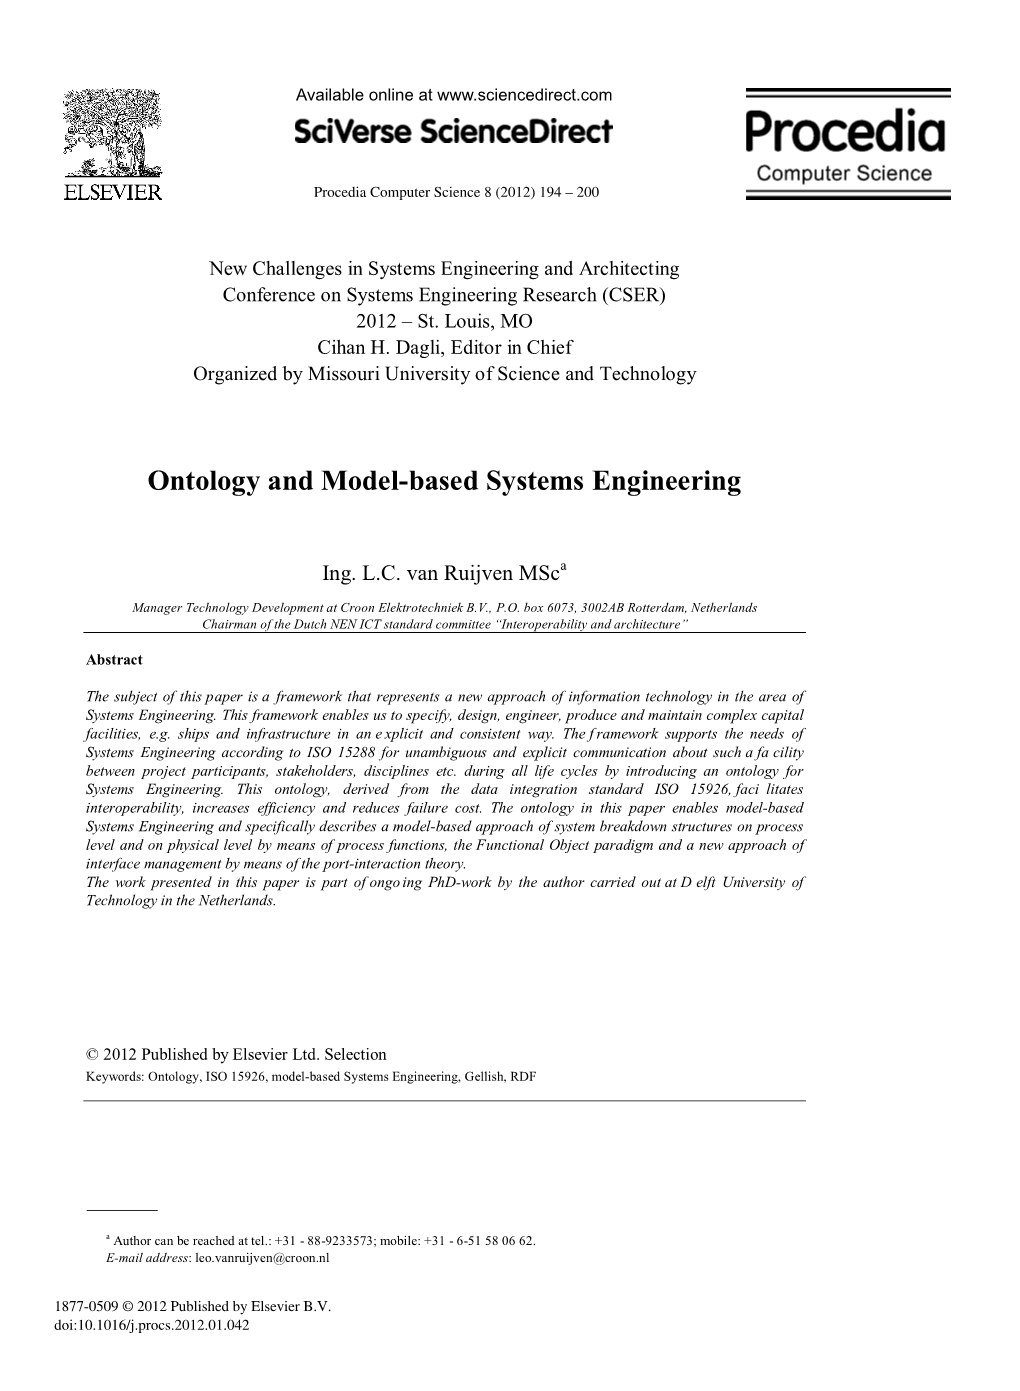 Ontology and Model-Based Systems Engineering